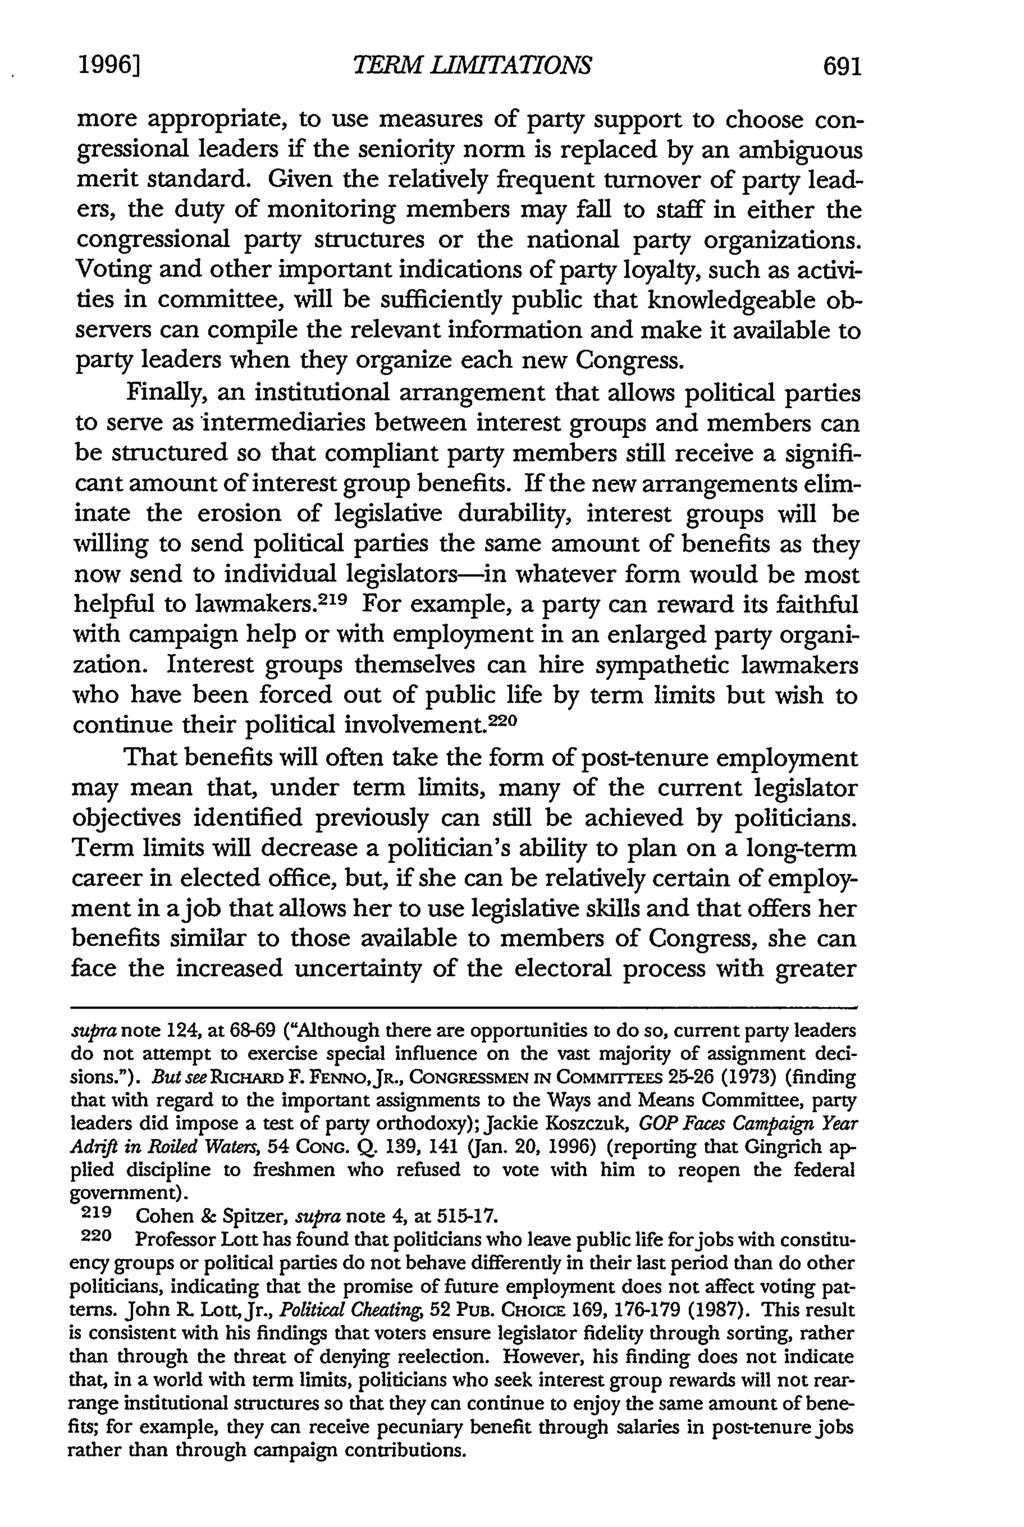 19961 TERM LIMITATIONS more appropriate, to use measures of party support to choose congressional leaders if the seniority norm is replaced by an ambiguous merit standard.